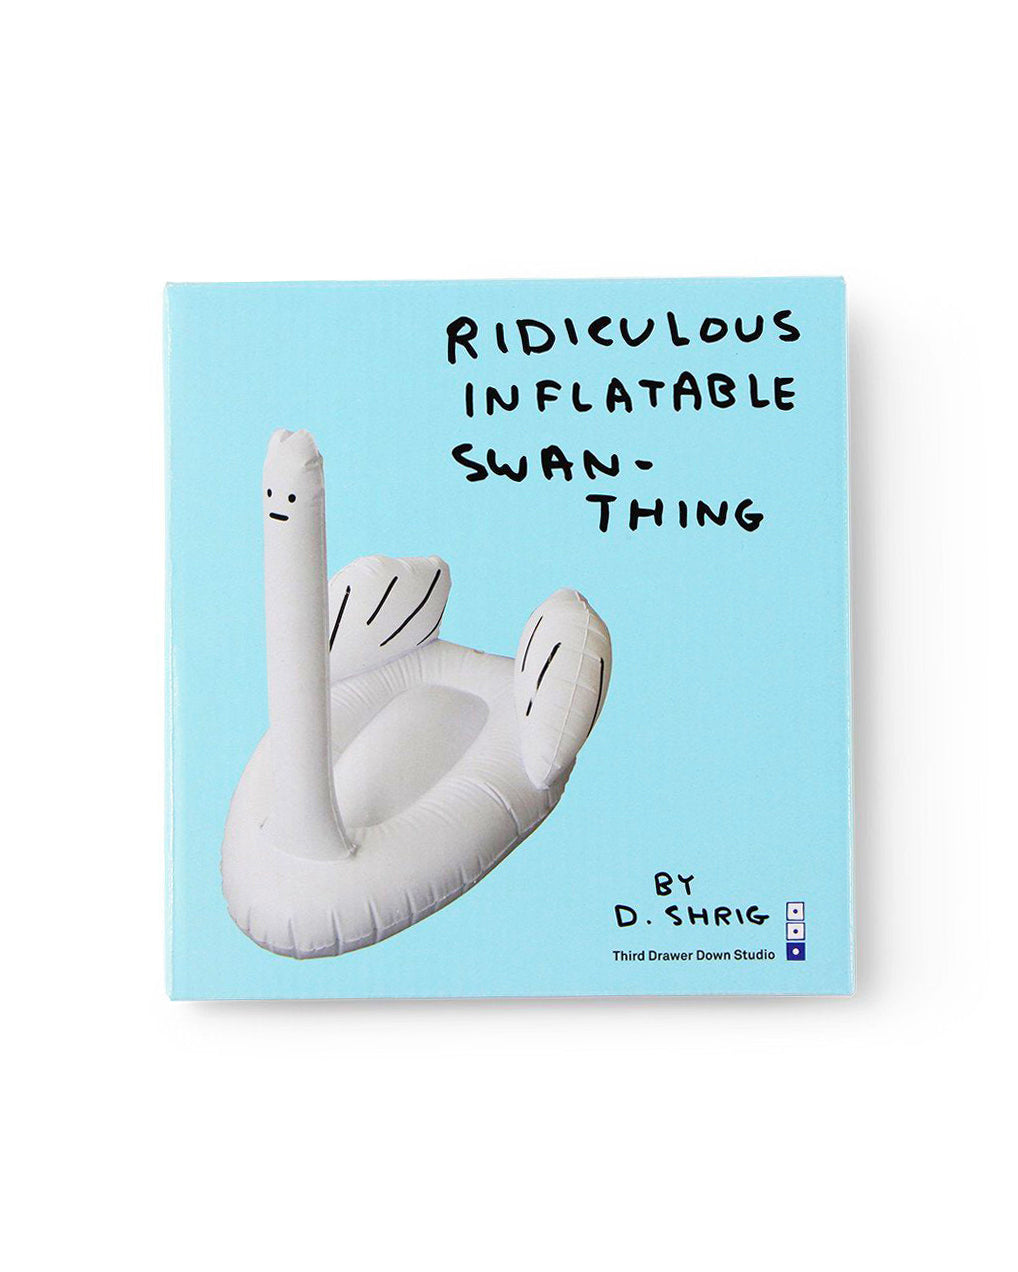 David Shrigley Ridiculous Inflatable Swan-Thing